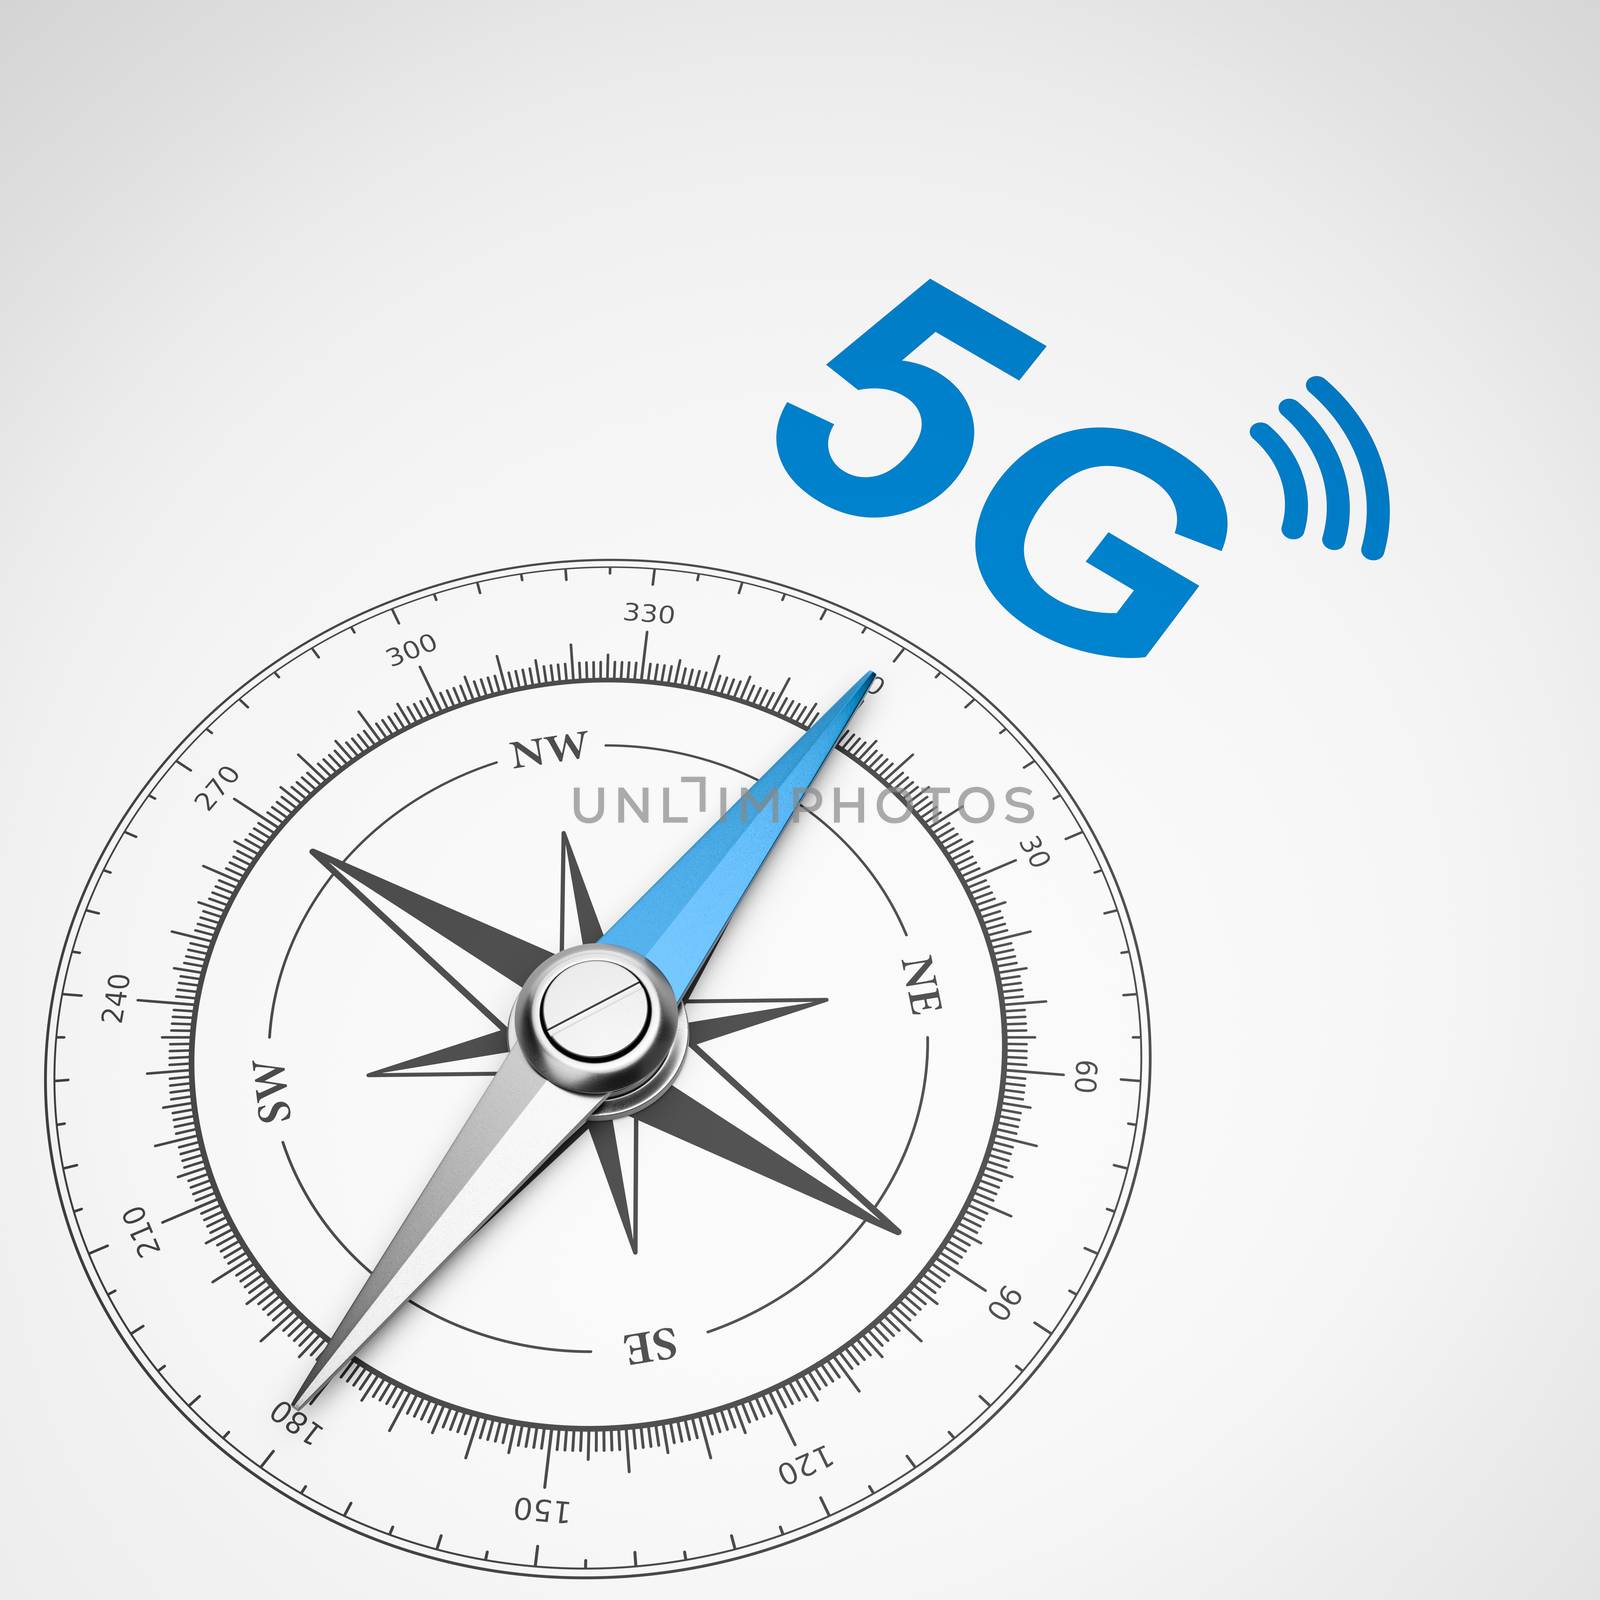 Magnetic Compass with Needle Pointing Blue 5G Text on White Background 3D Illustration